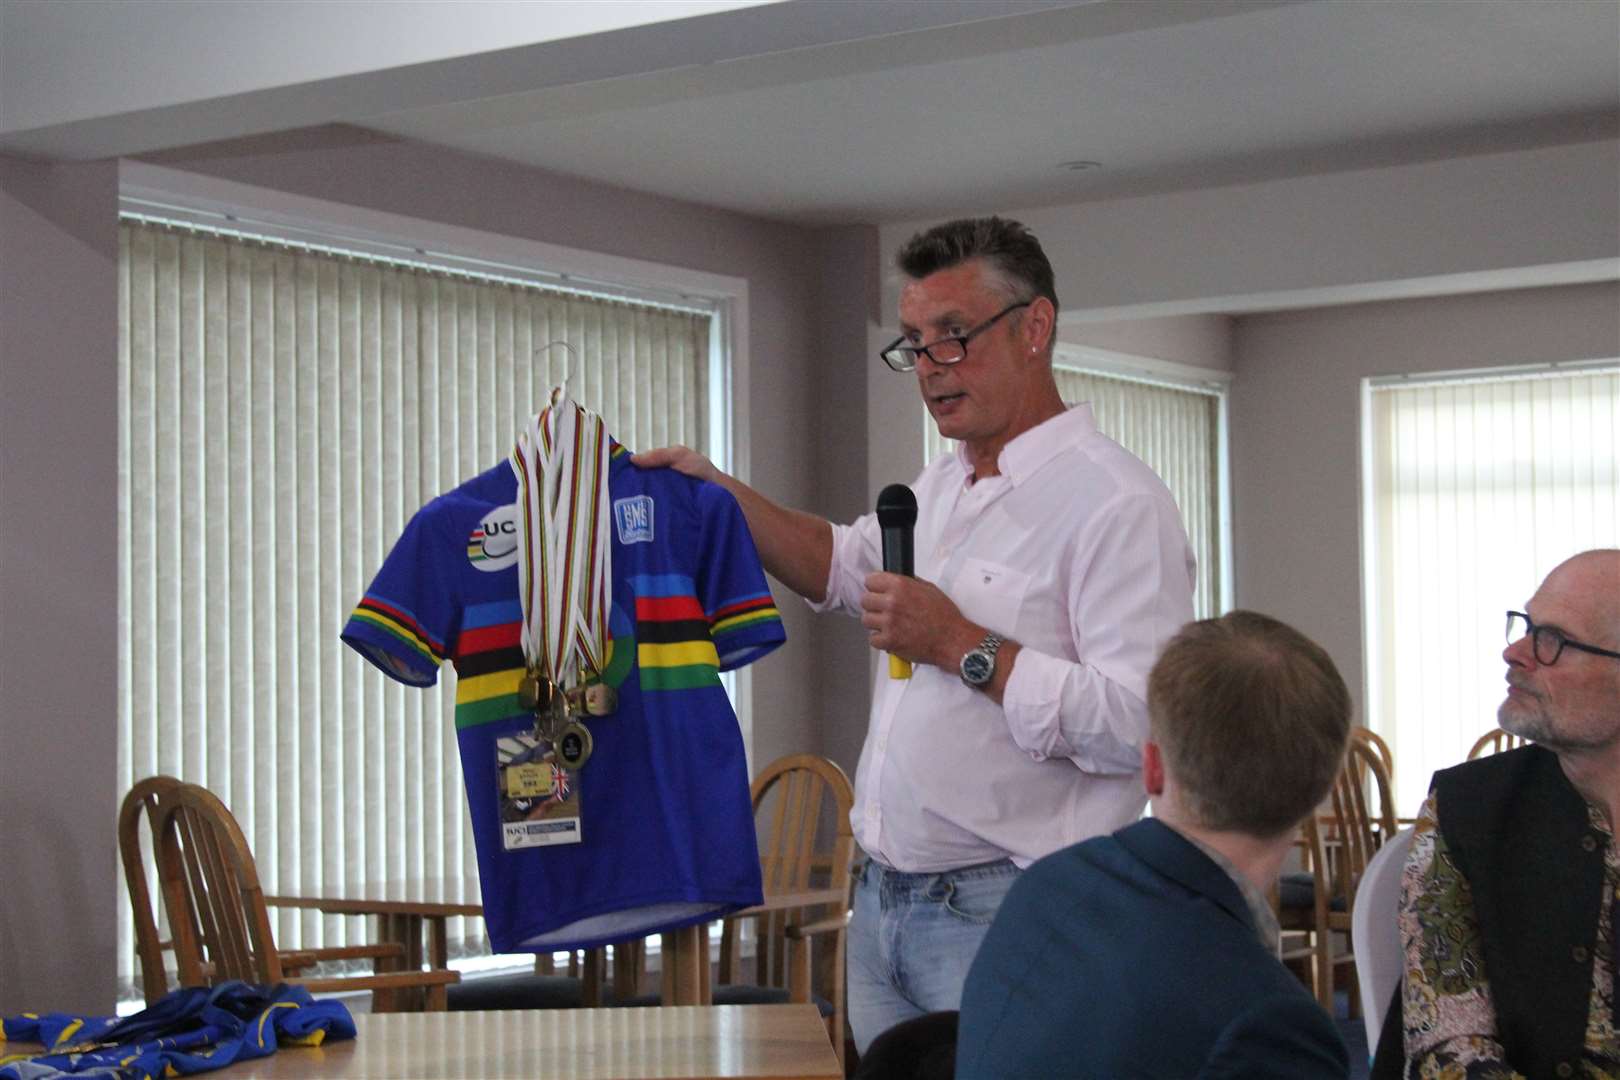 Peter Ettles shows interested members his shirts and medal collection.